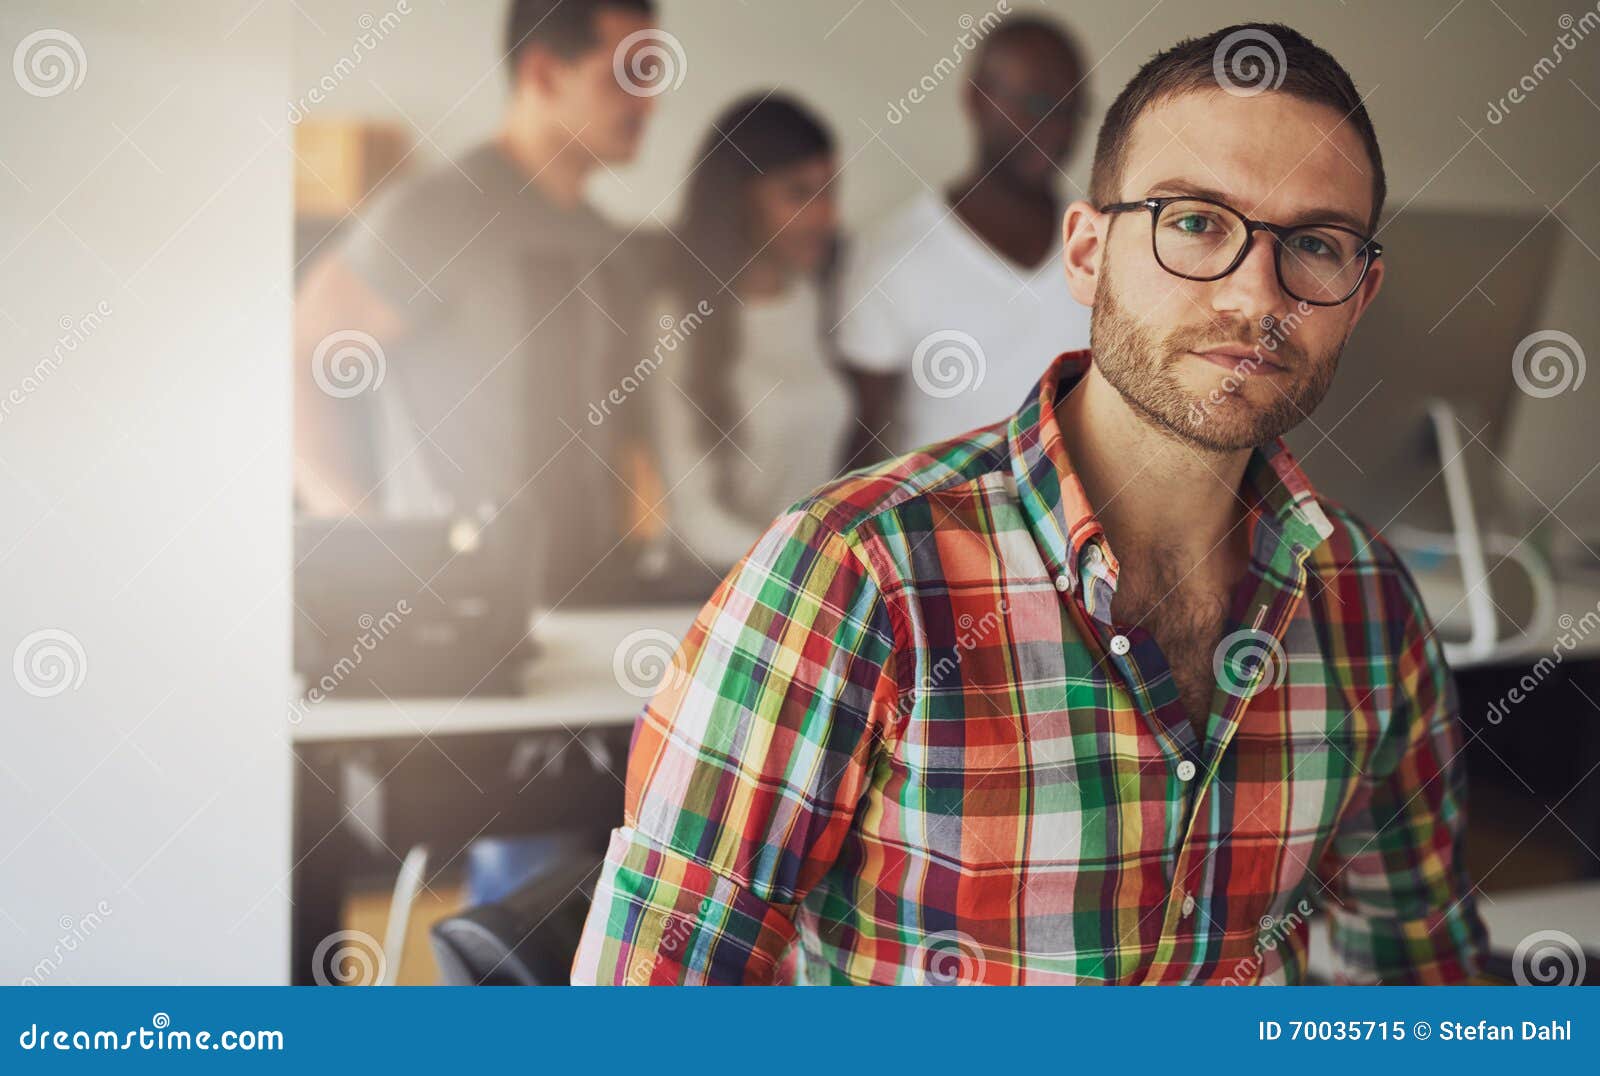 Serious Handsome Business Owner Stock Image - Image of ingenious ...